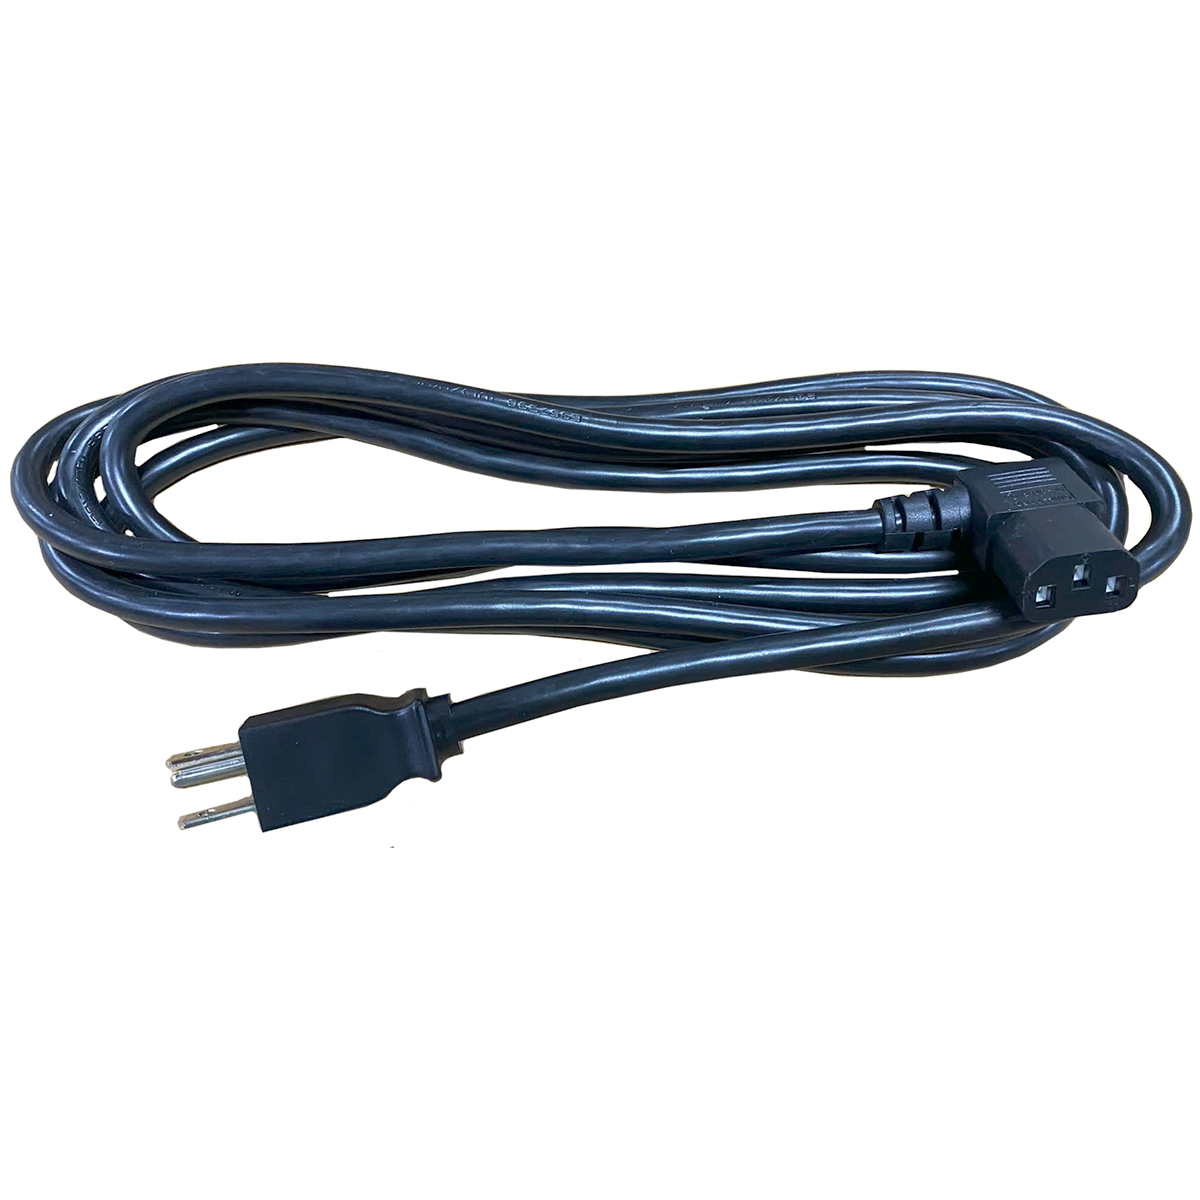 Delta-Q Ac Cord, For Use With Ic650 & Ic1200 Delta-Q Chargers